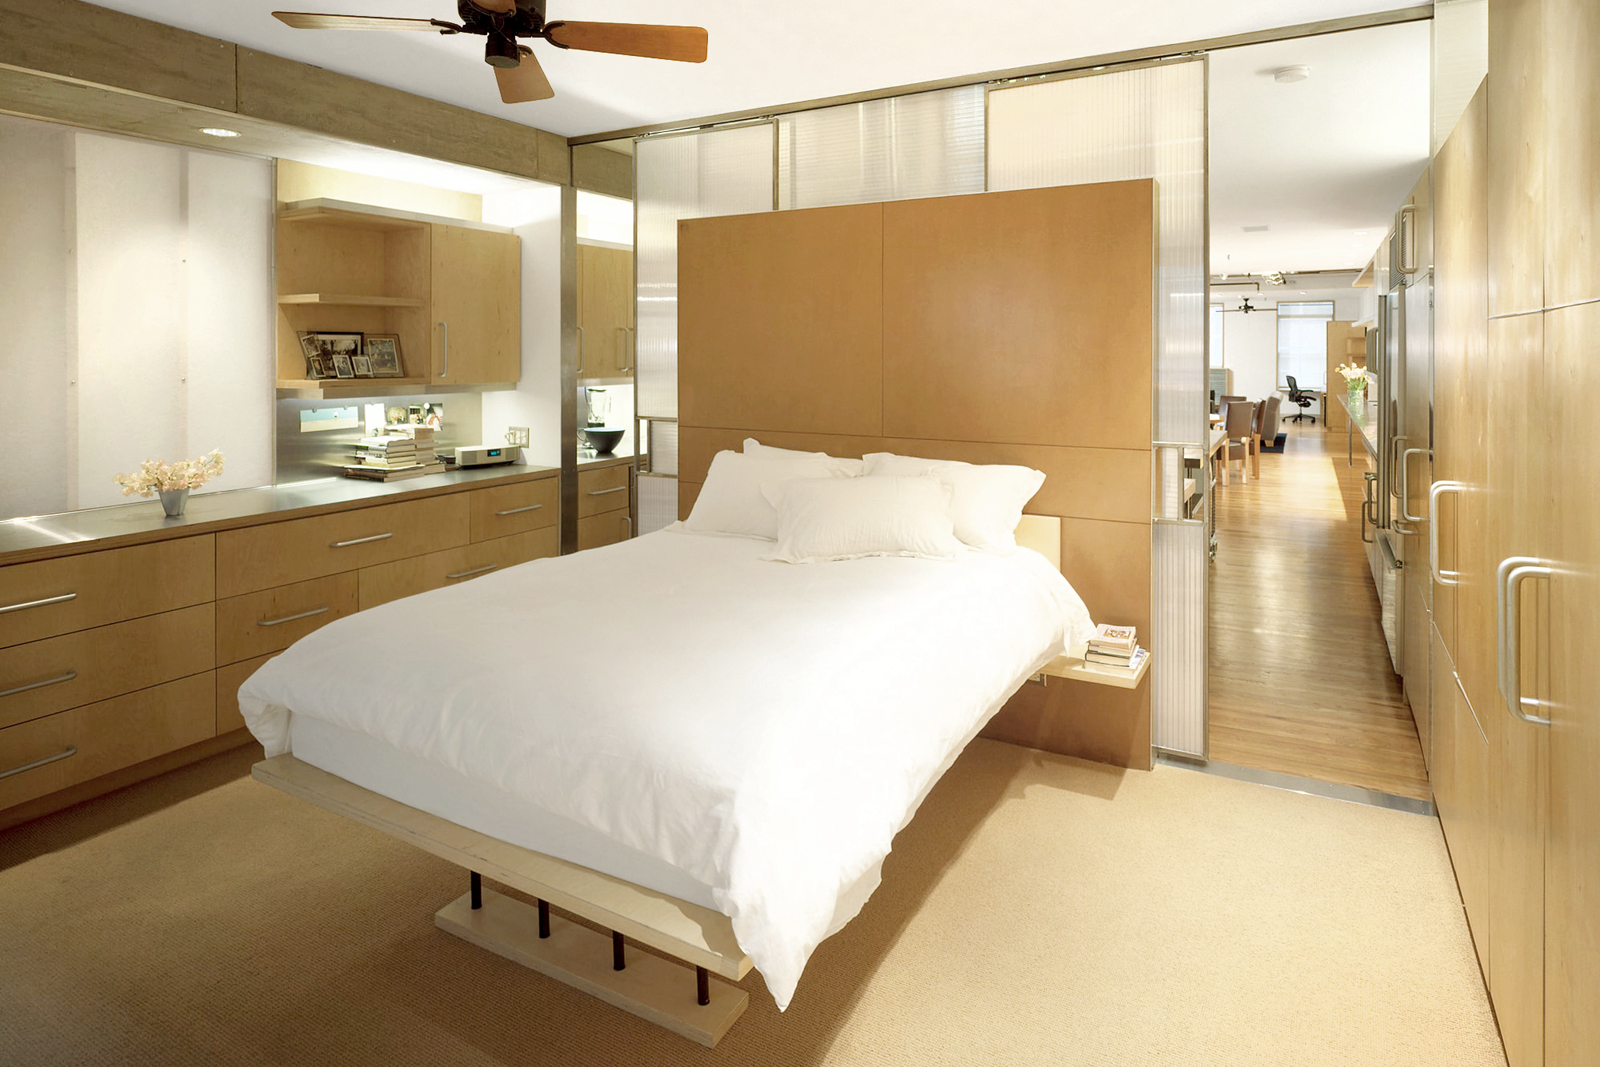 09-res4-resolution-4-architecture-modern-apartment-residential-rons-loft-interior-master-bedroom.jpg